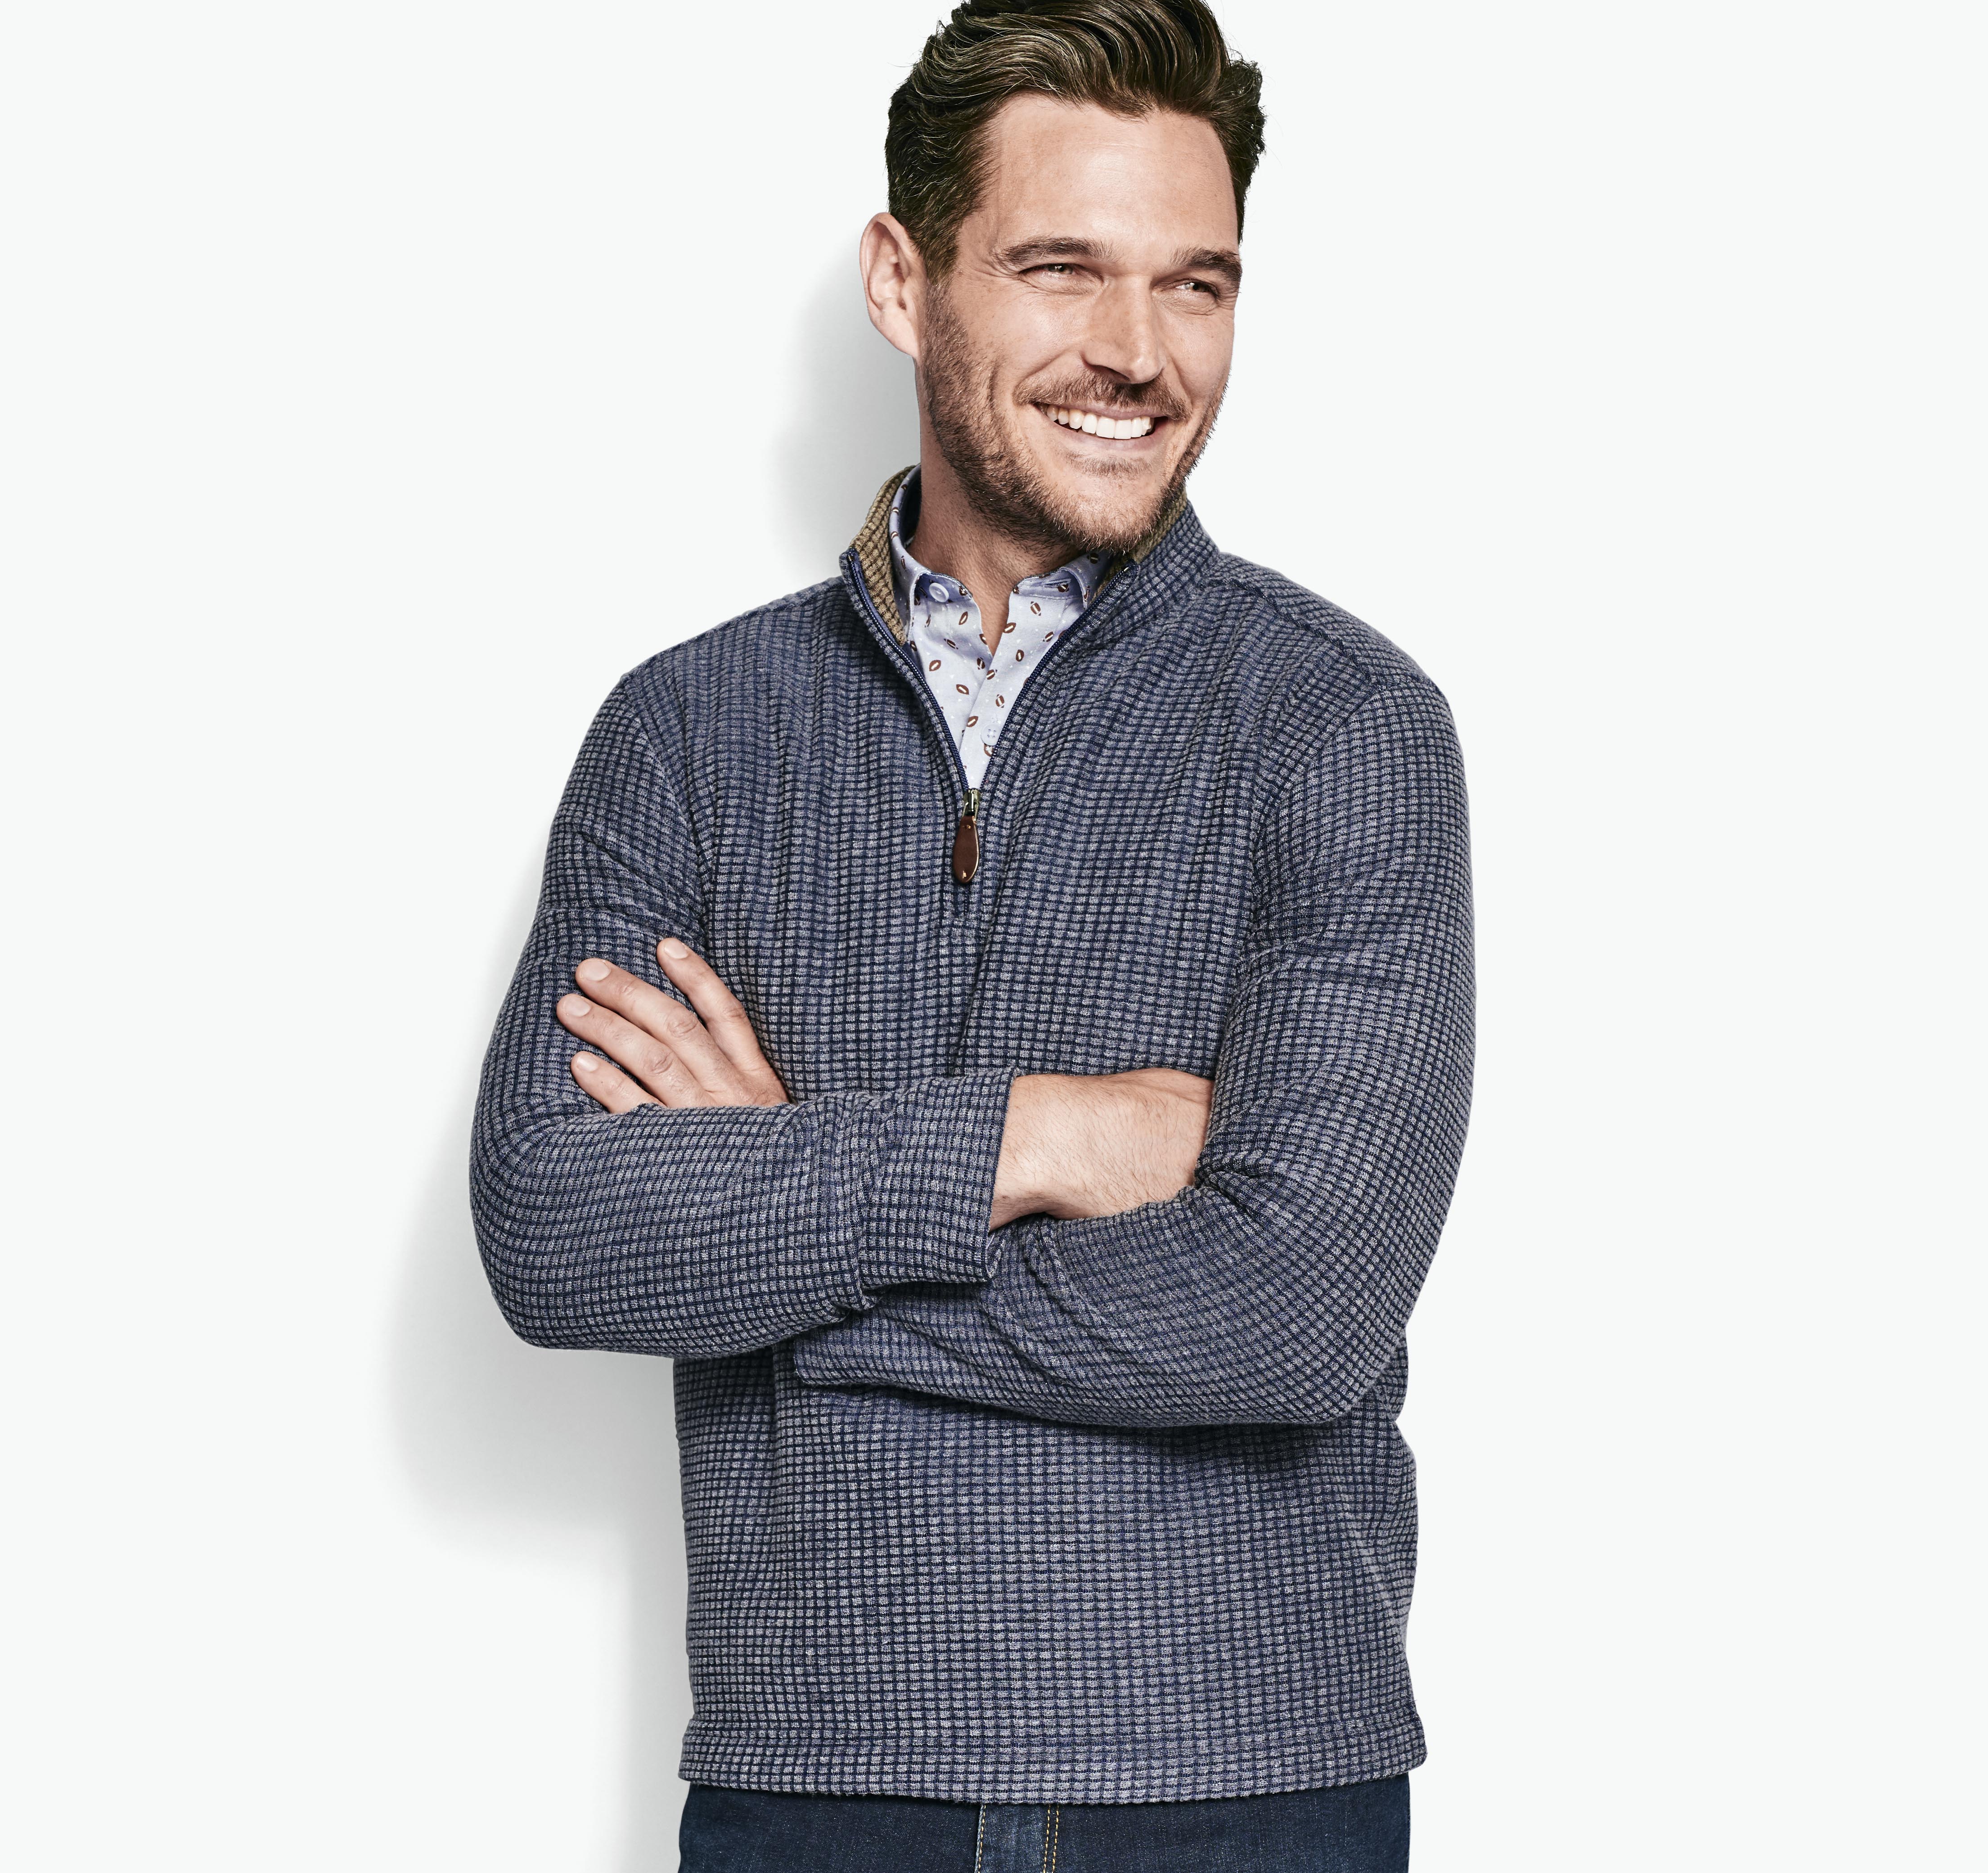 Replay Waffle Knit Jumper in Blue for Men